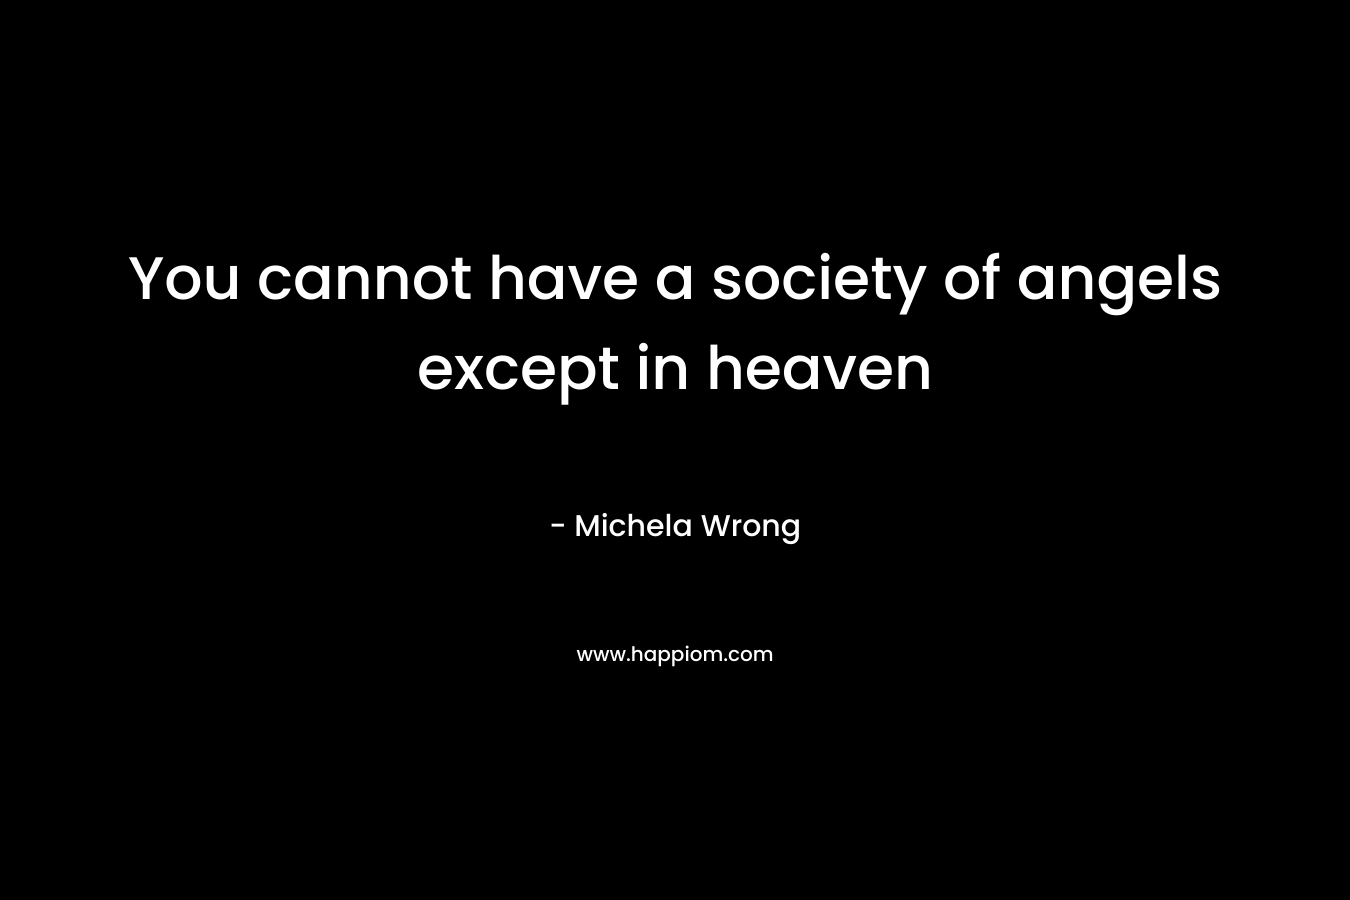 You cannot have a society of angels except in heaven